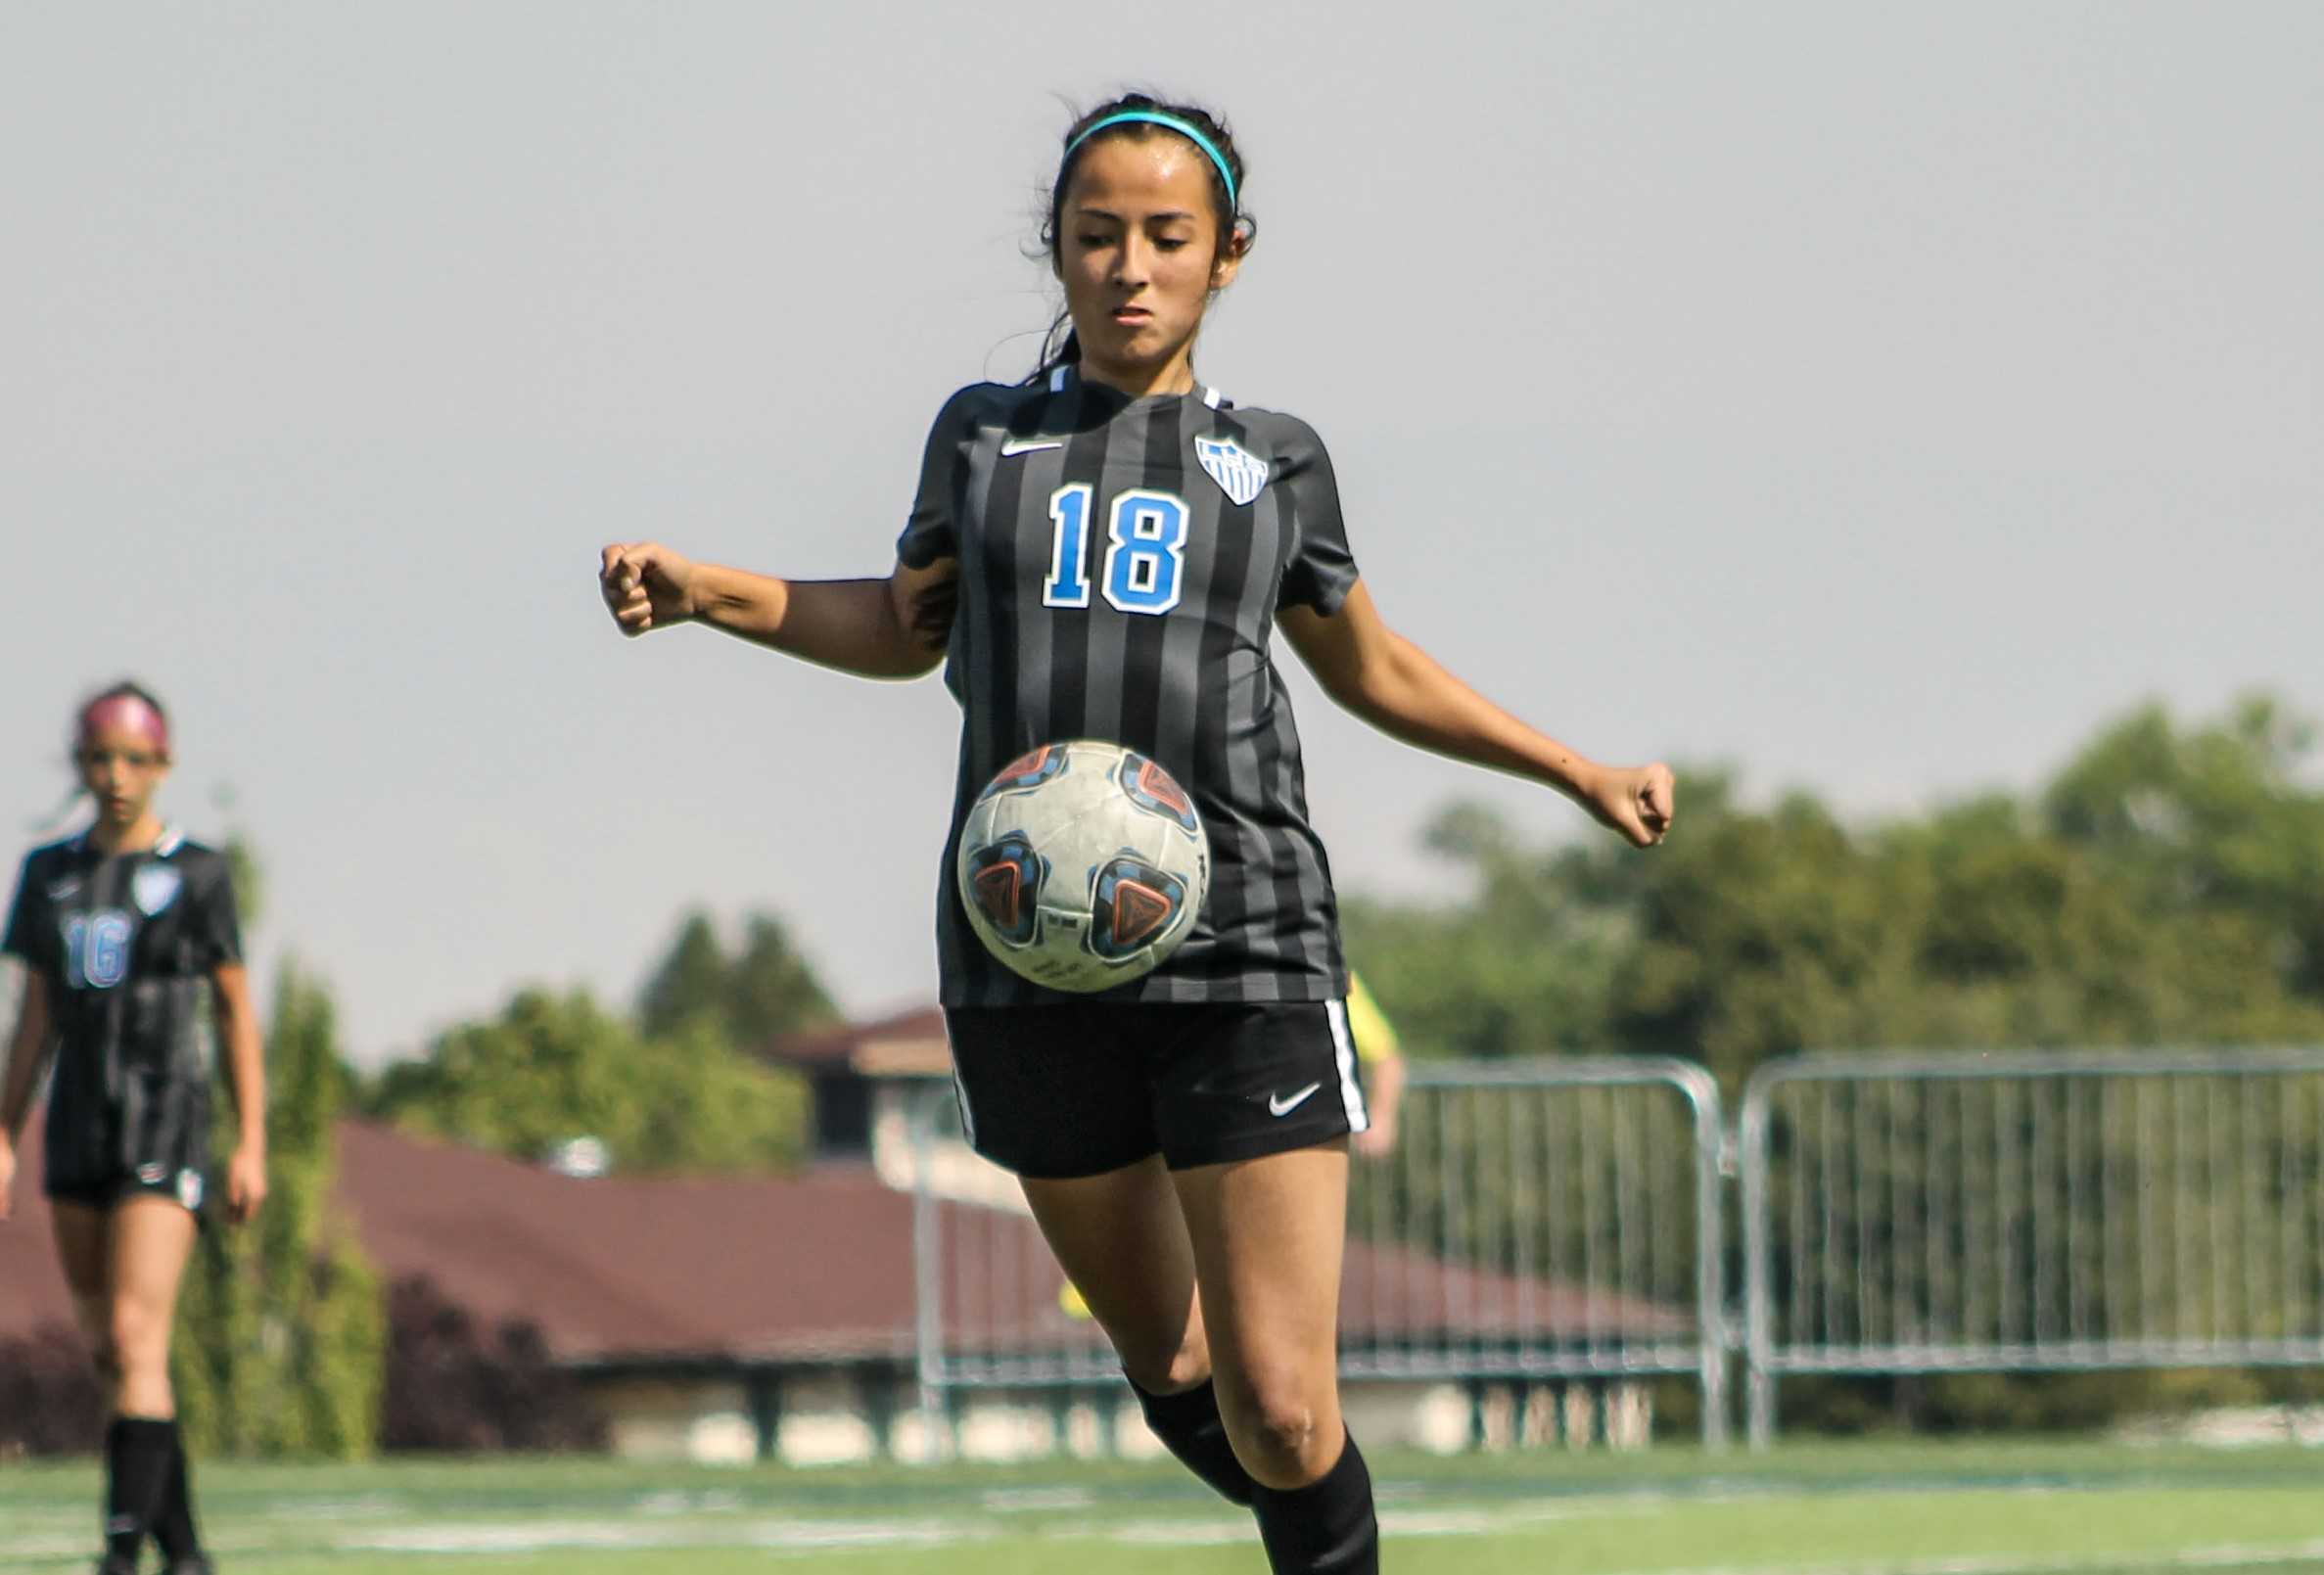 La Grande senior Rosie Aguilera, a fourth-year starter, was the GOL player of the year in 2021. (Photo by Kathleen Brown)